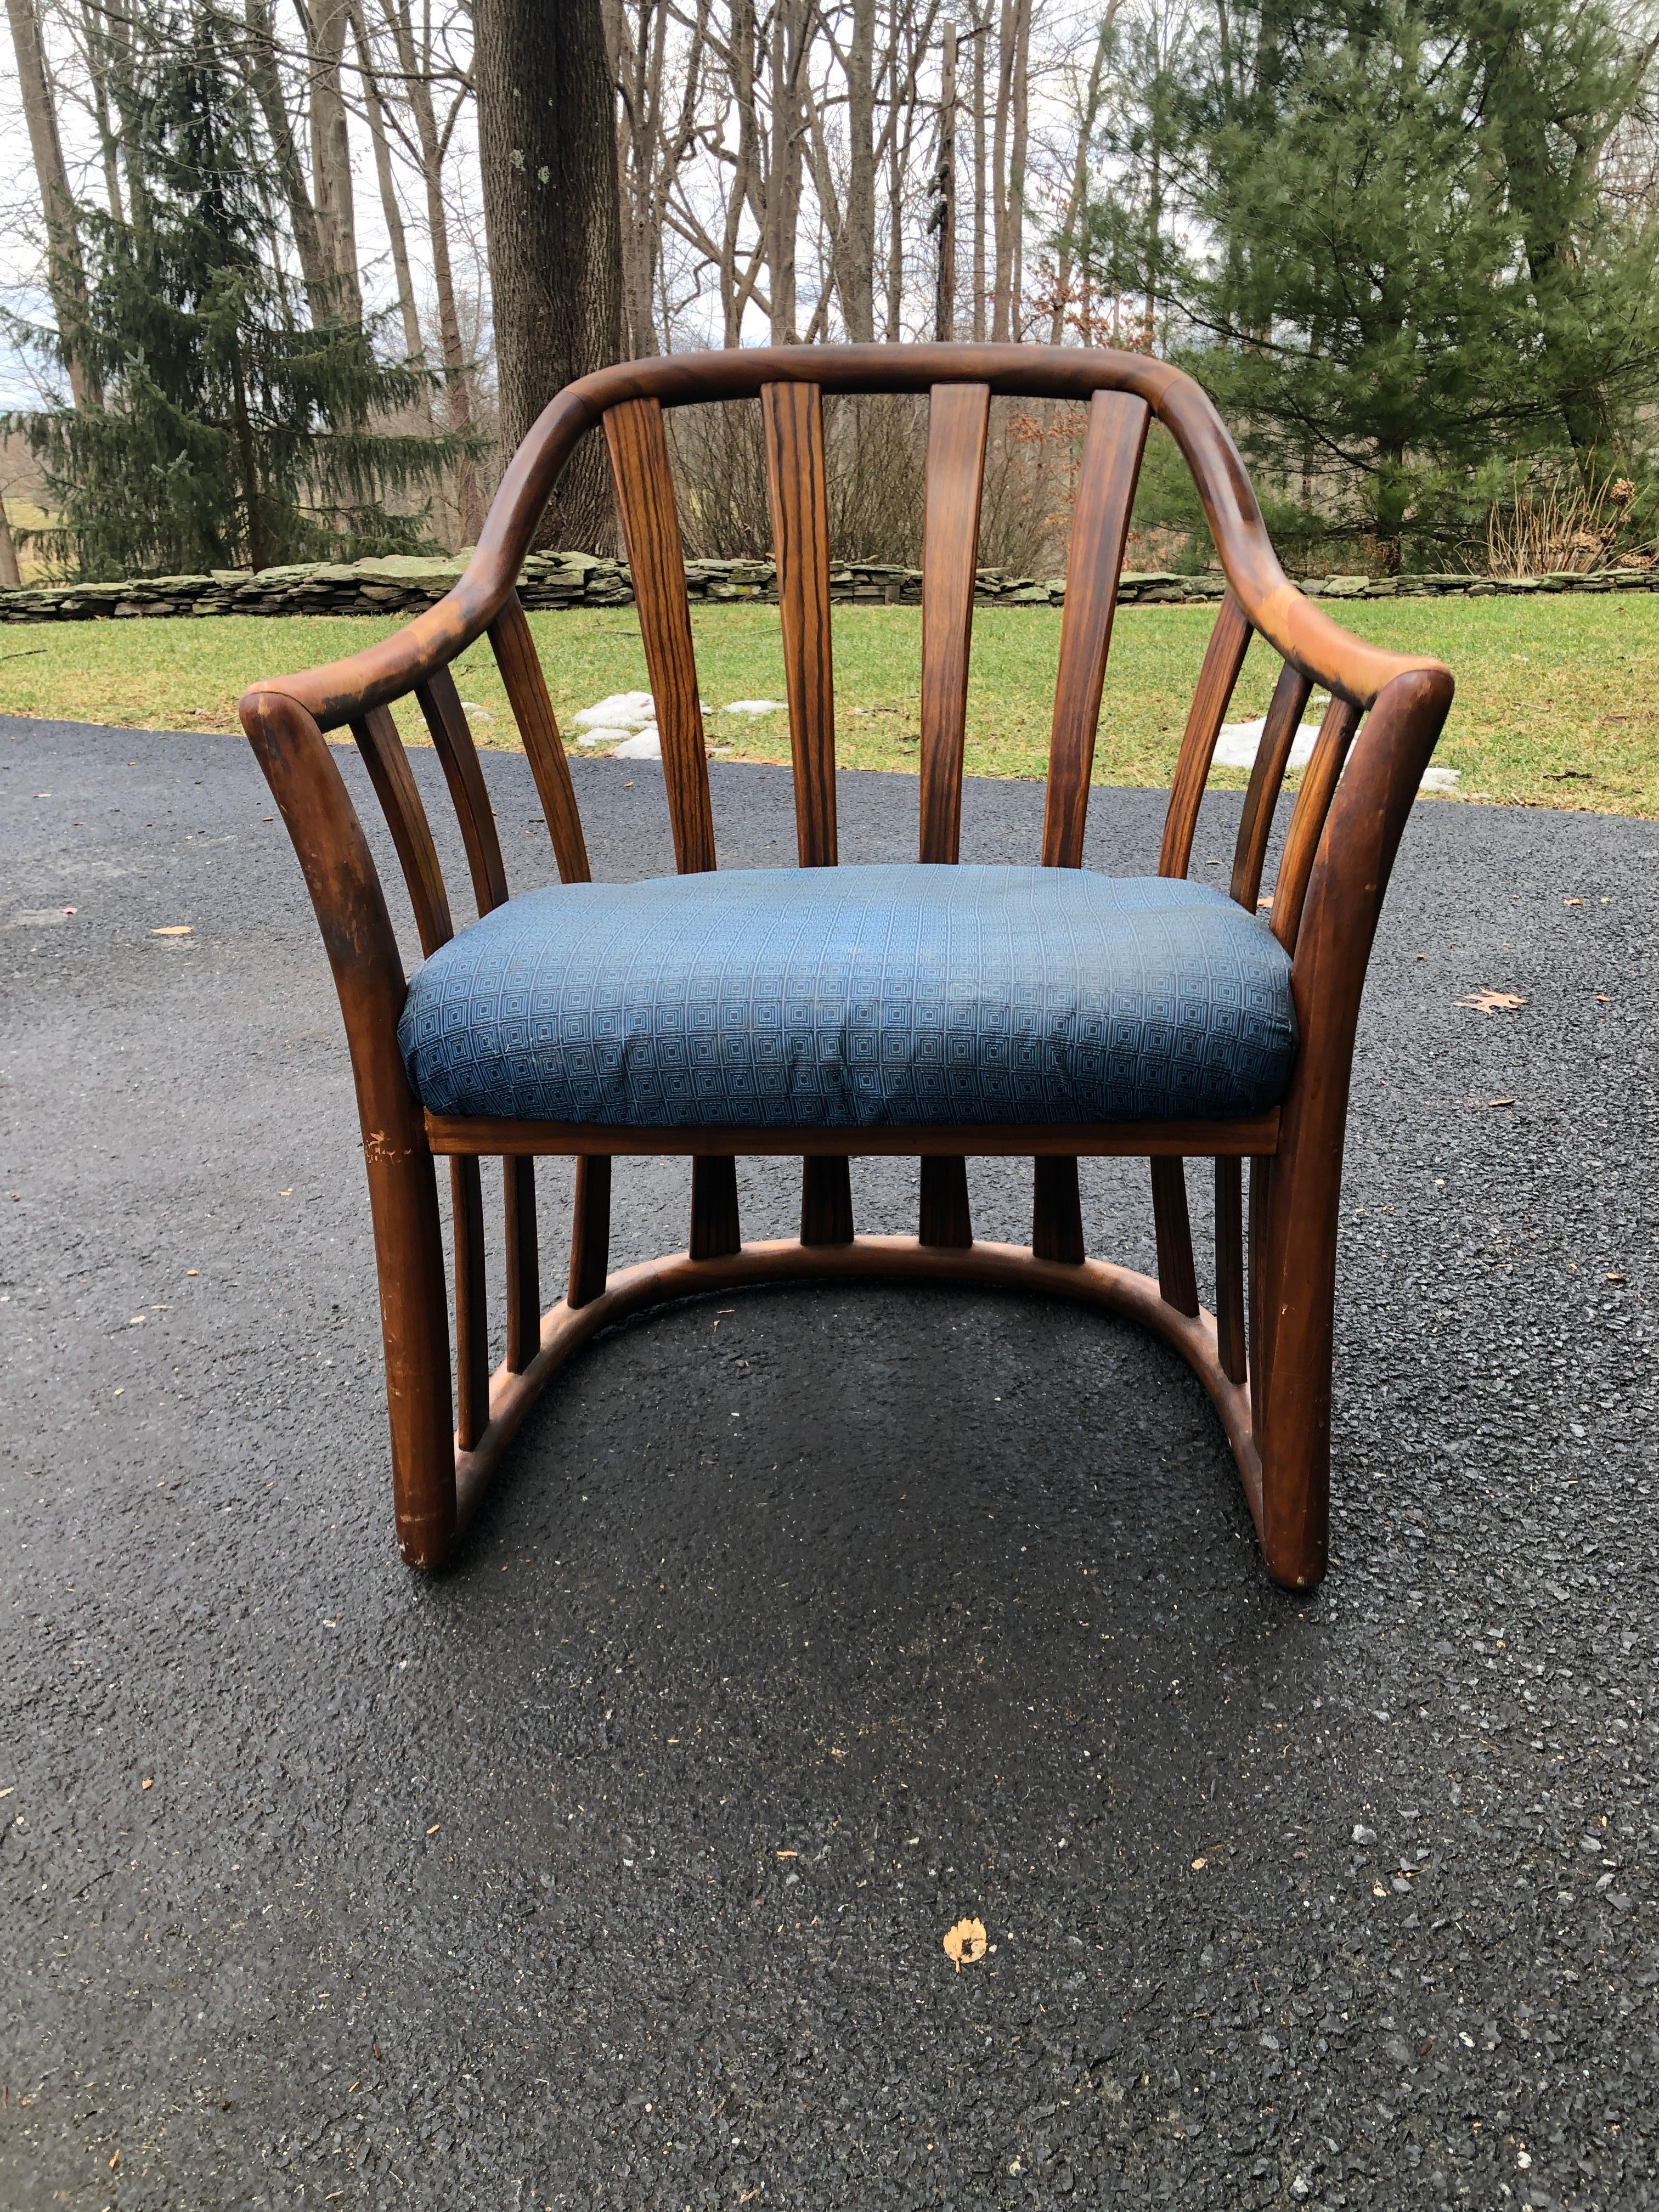 Edward Wormley for Drexel midcentury rosewood club chair
Original label and fabric Finnish,
circa 1970.